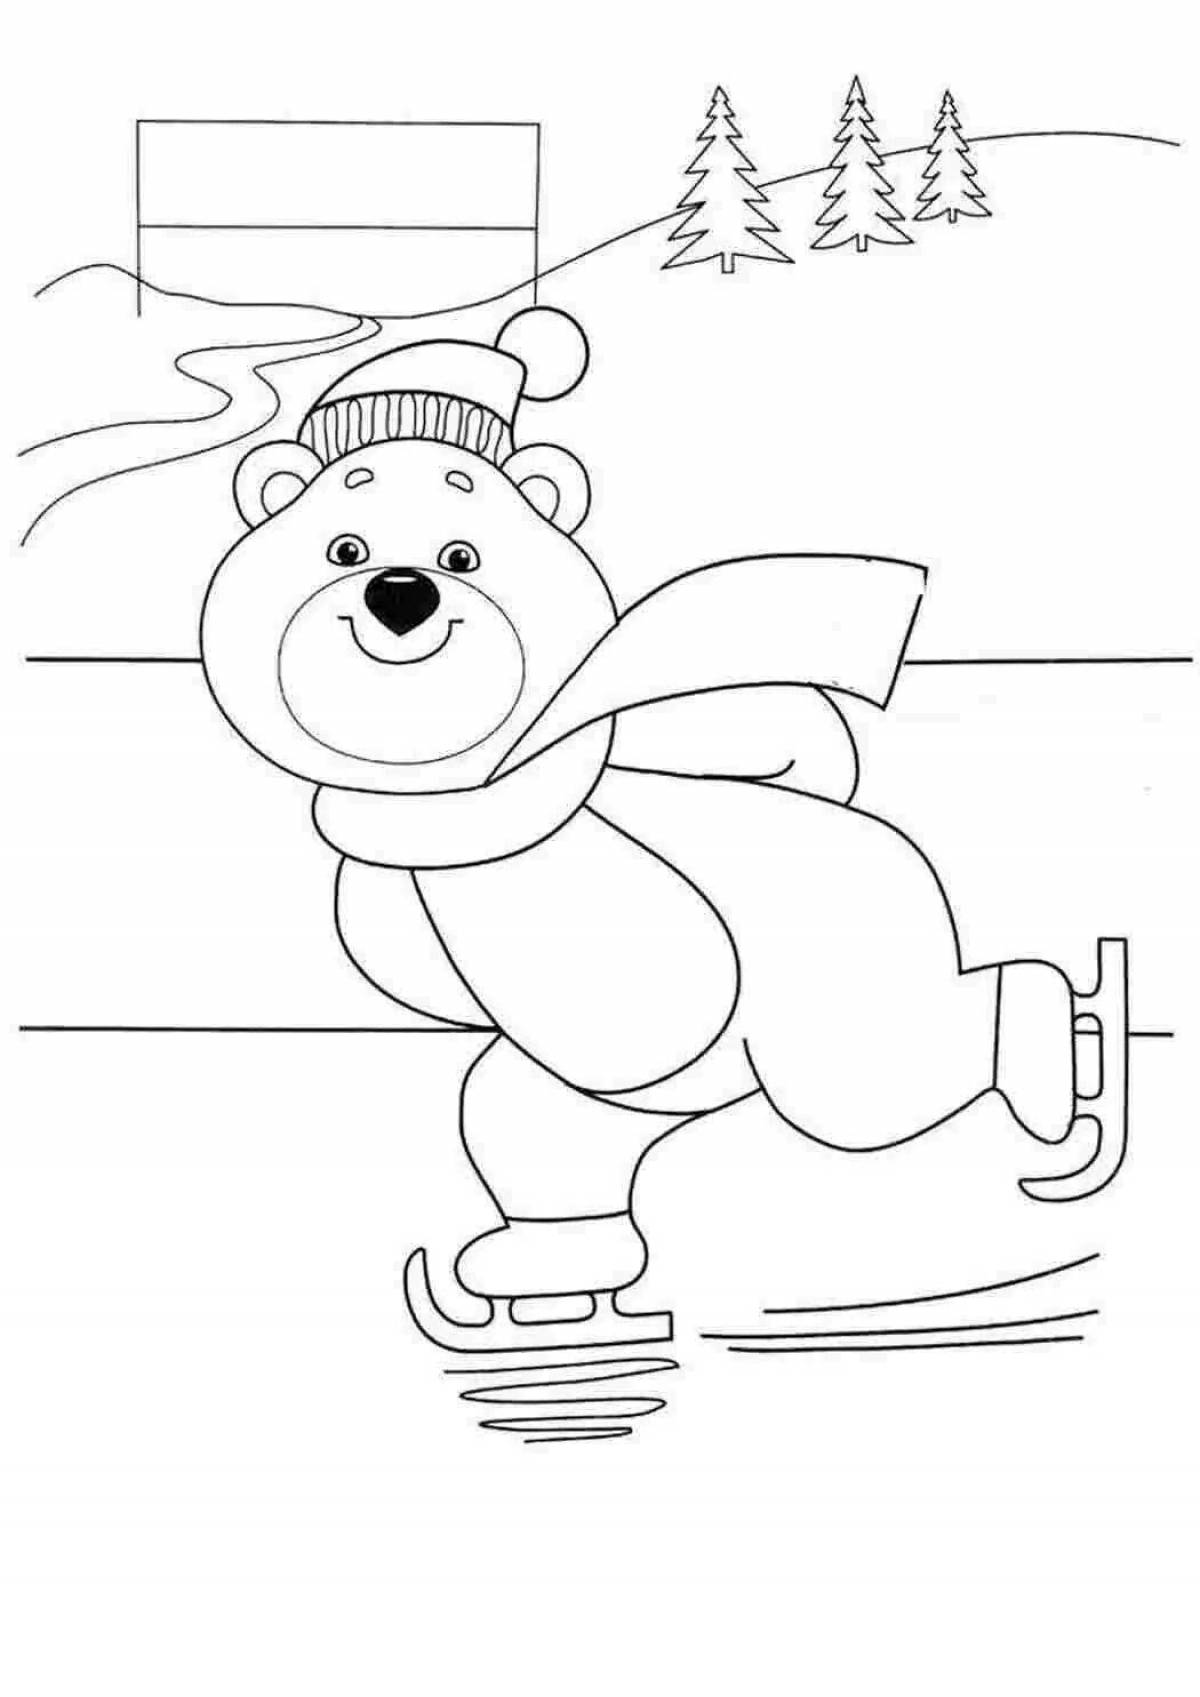 Winter olympics awesome coloring page